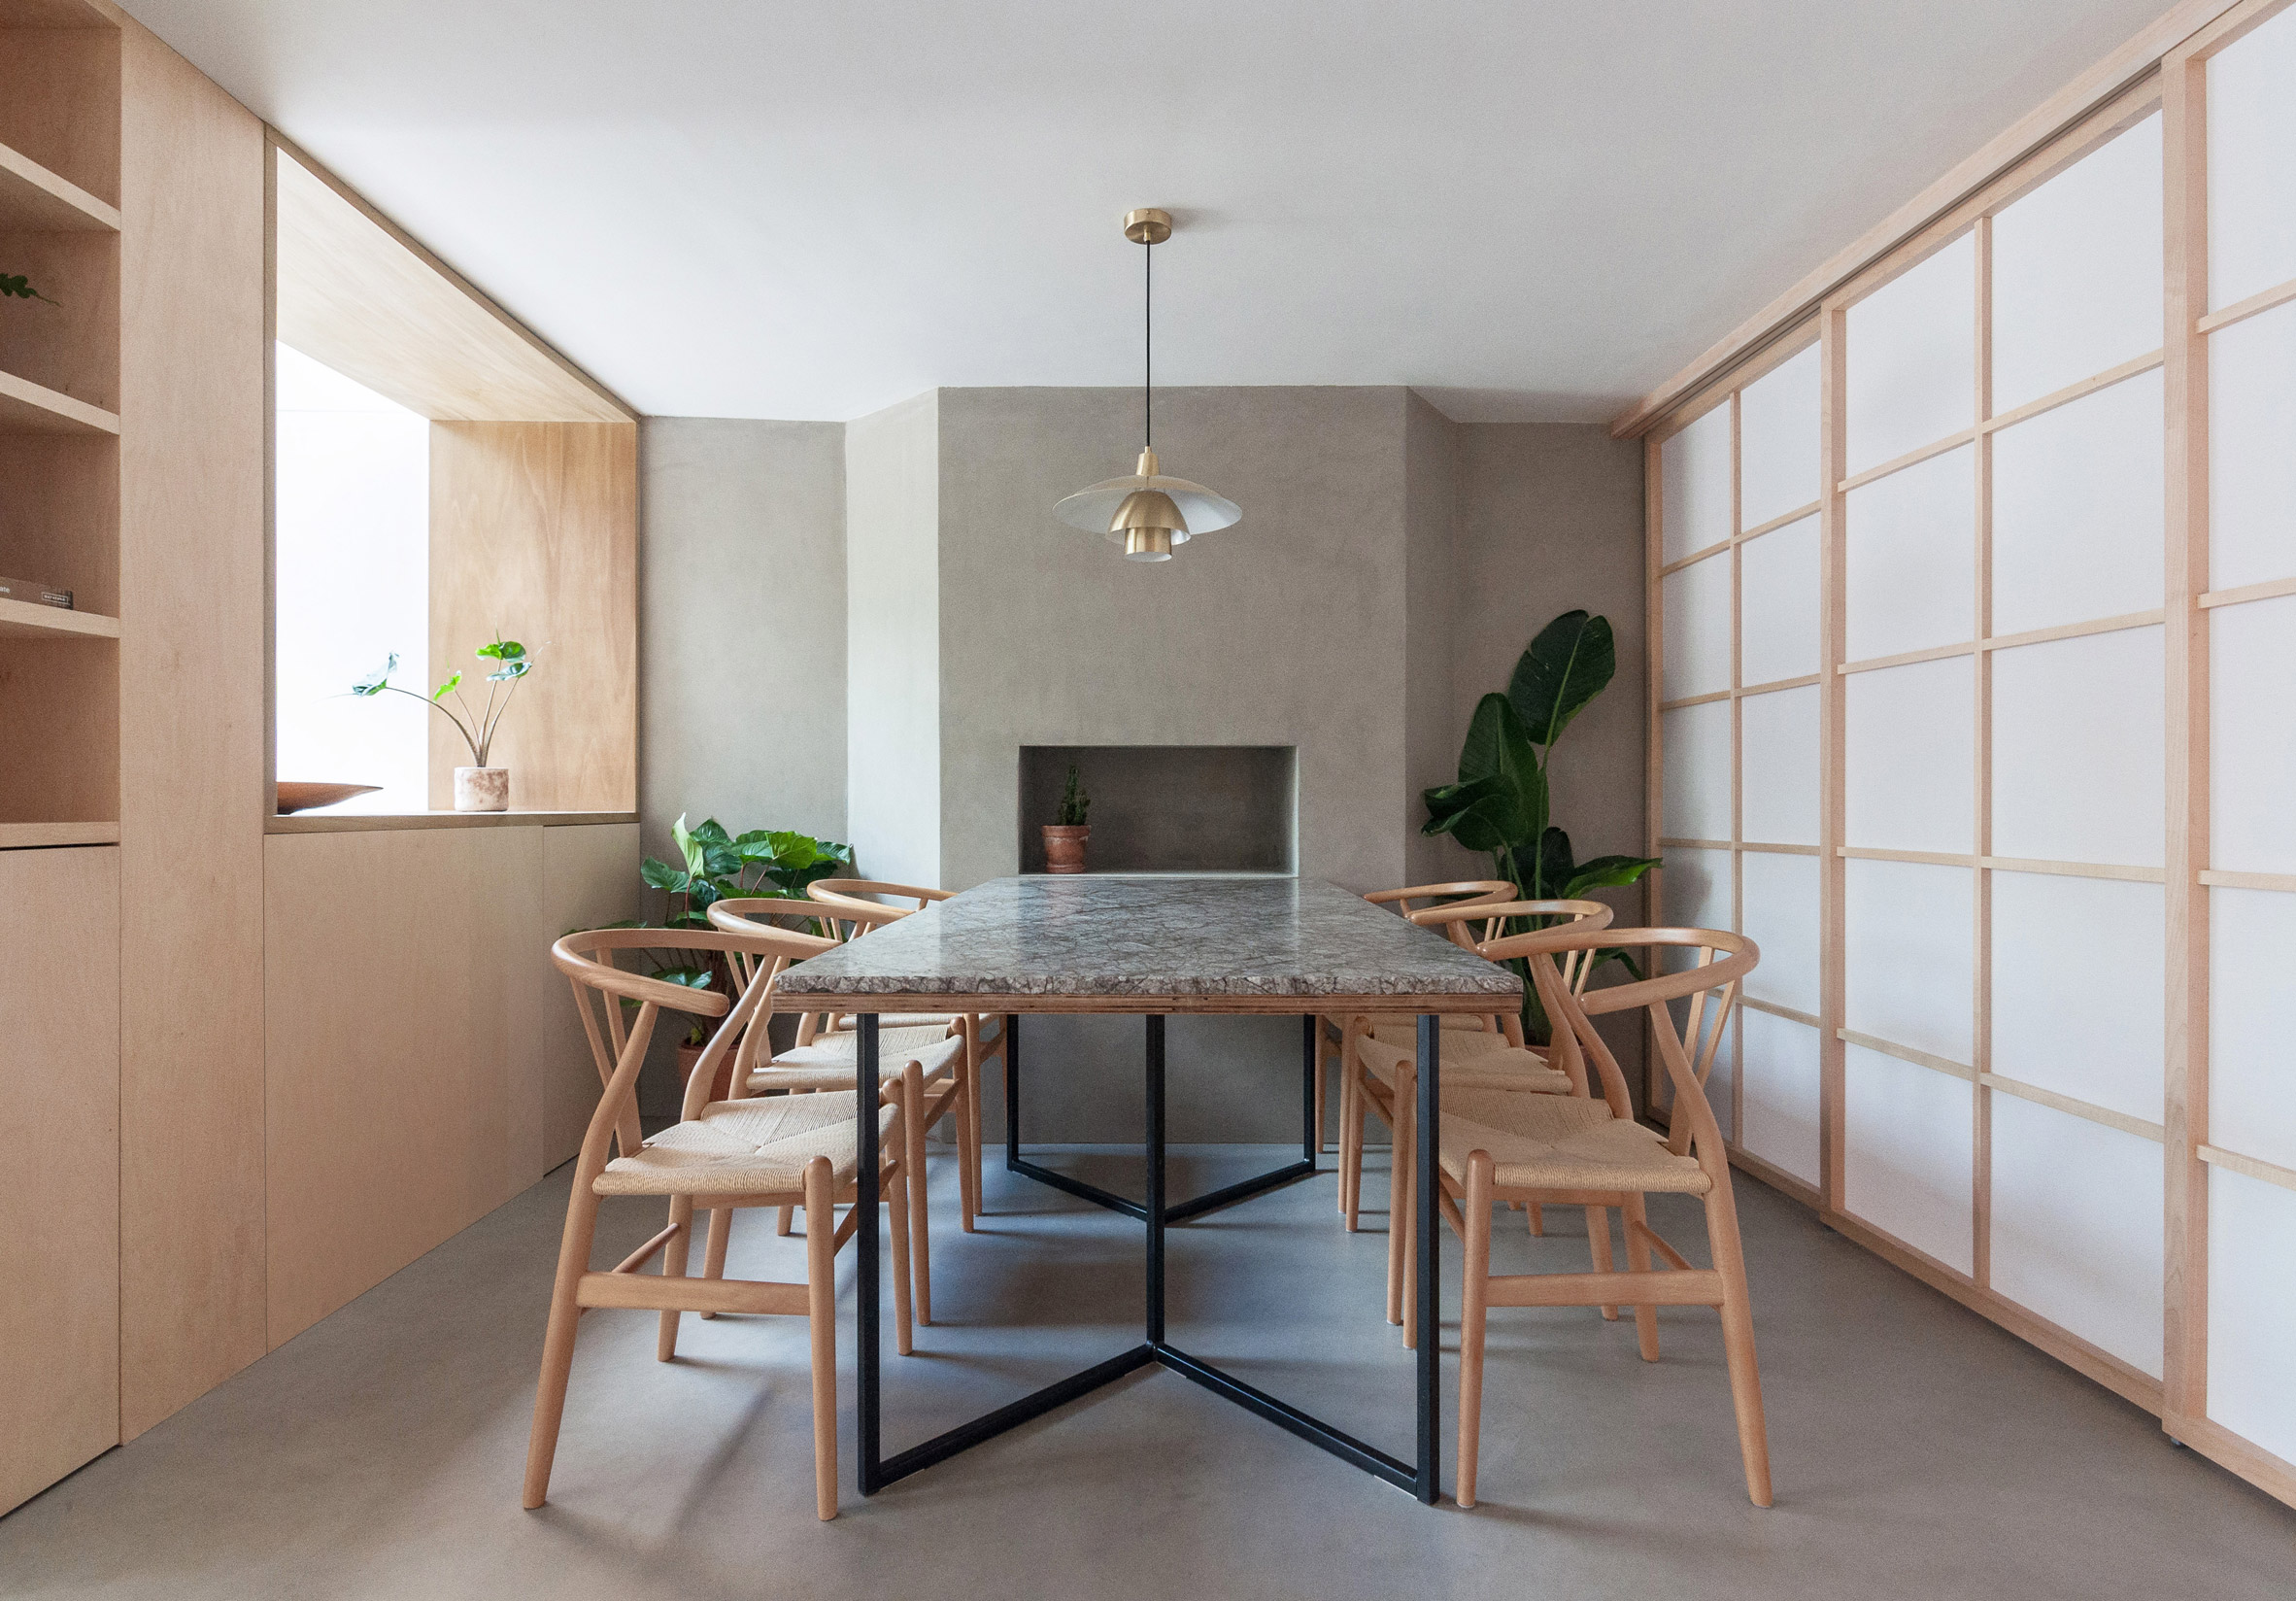 A dining room with Japanese-style shoji screens